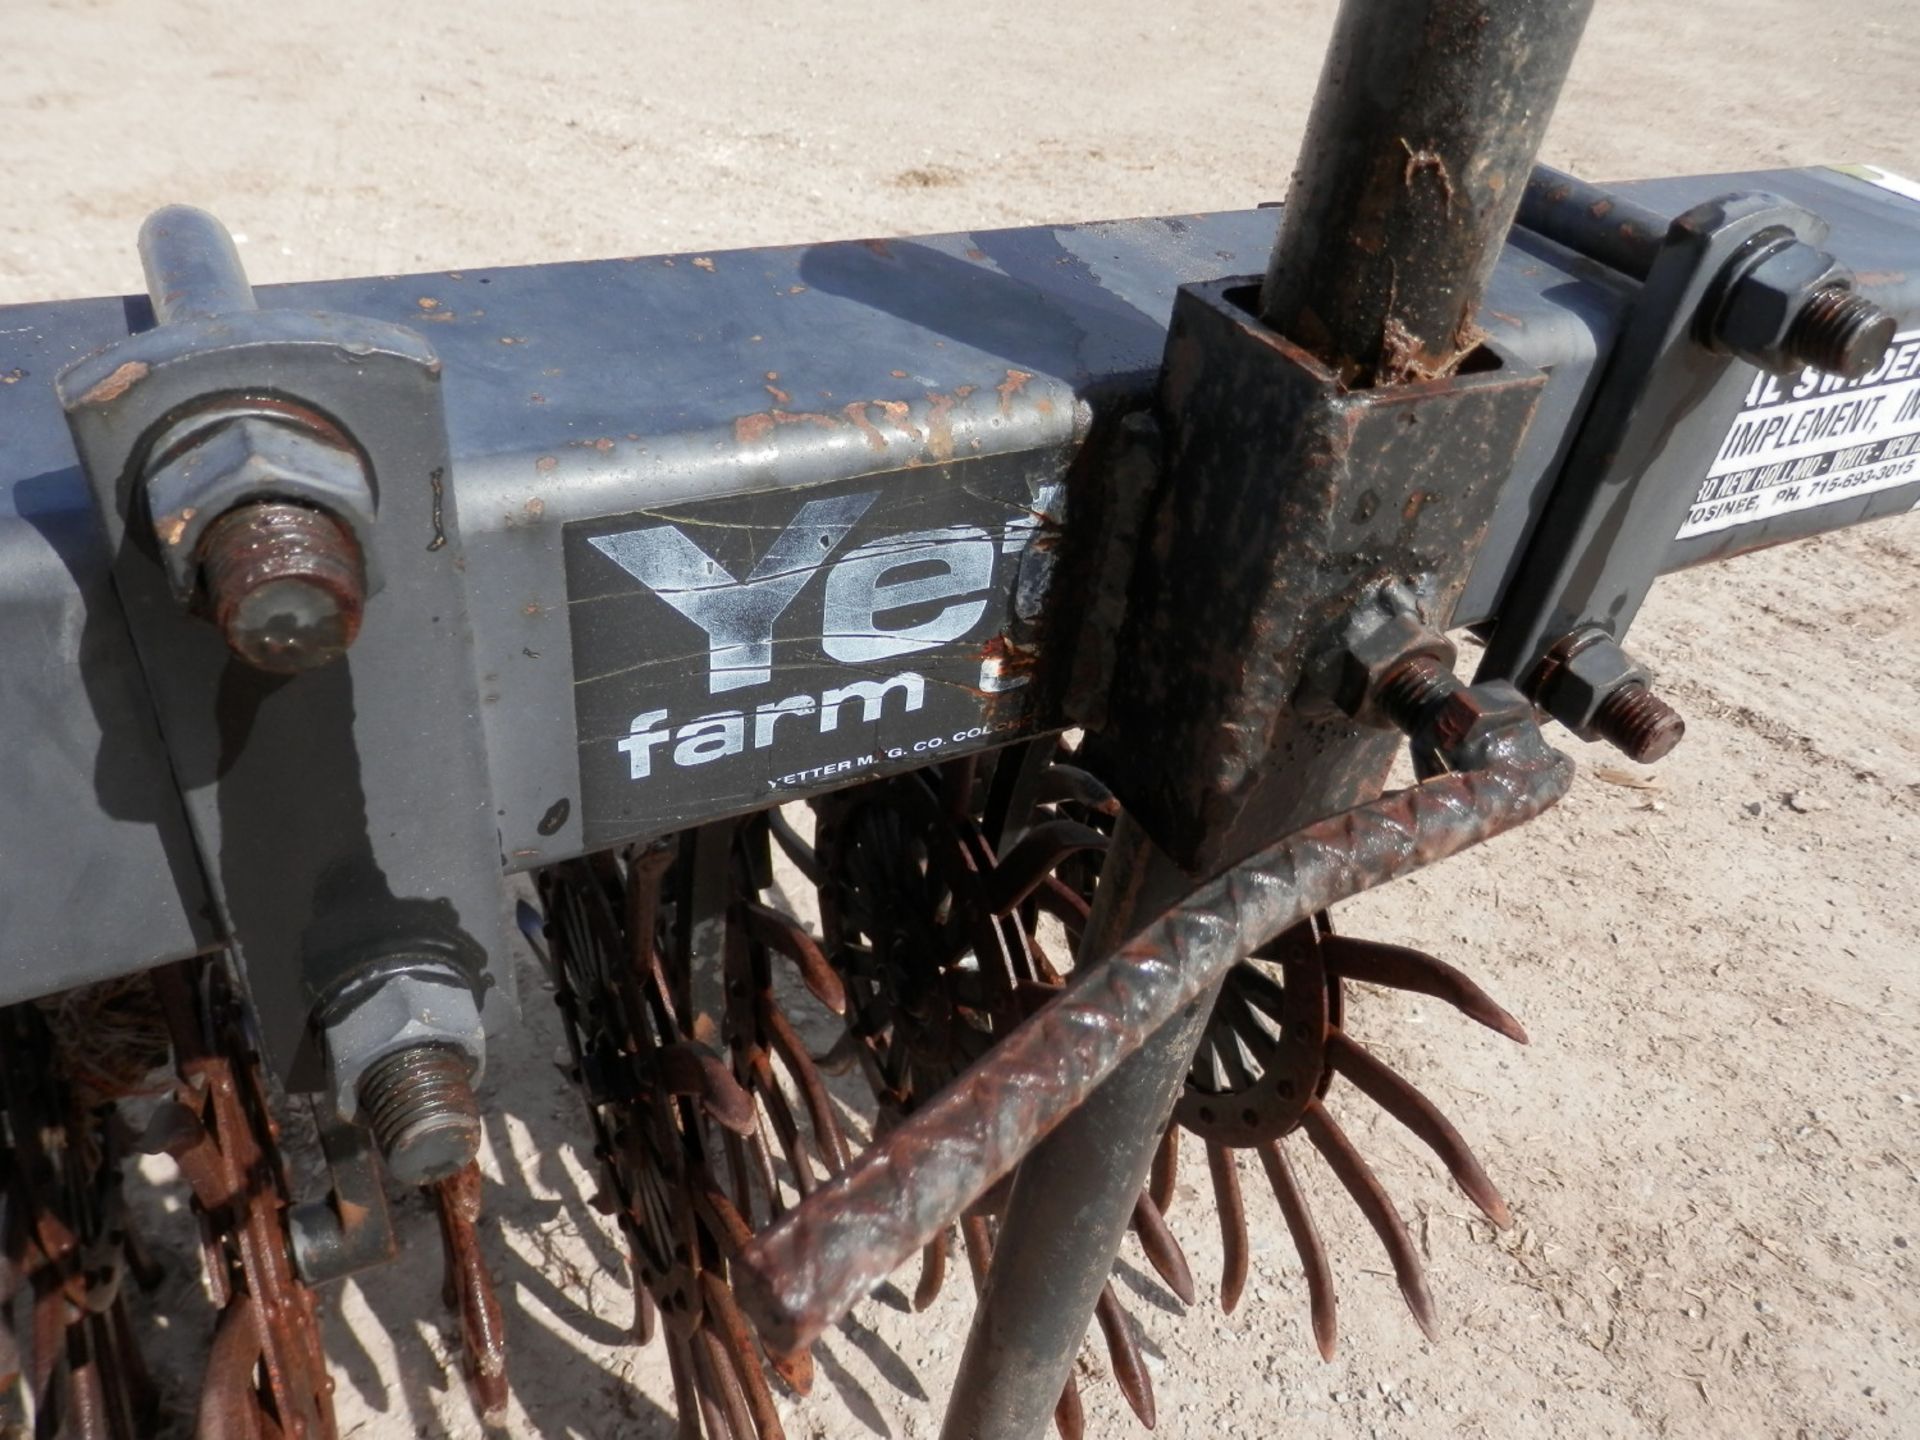 YETTER 3-PT 15' ROTARY HOE - Image 4 of 4